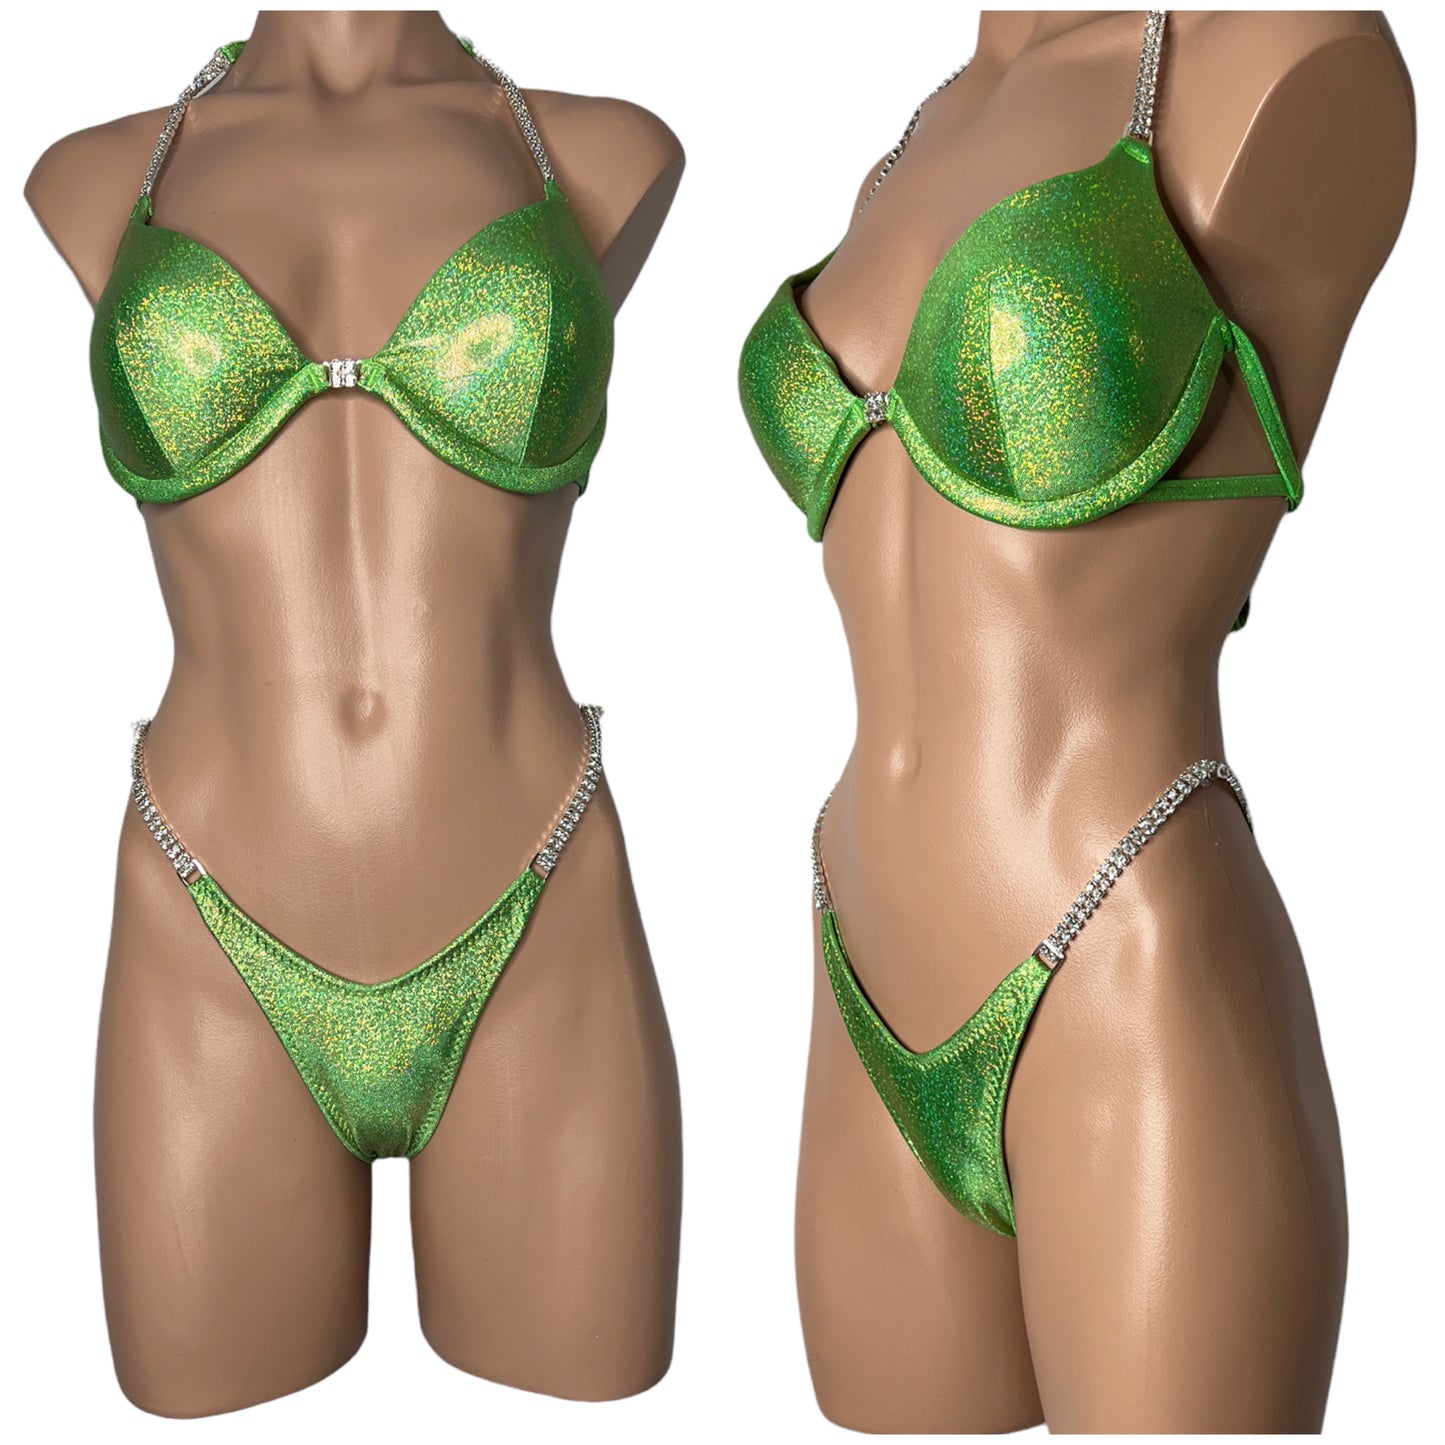 Wellness suit with push up bra